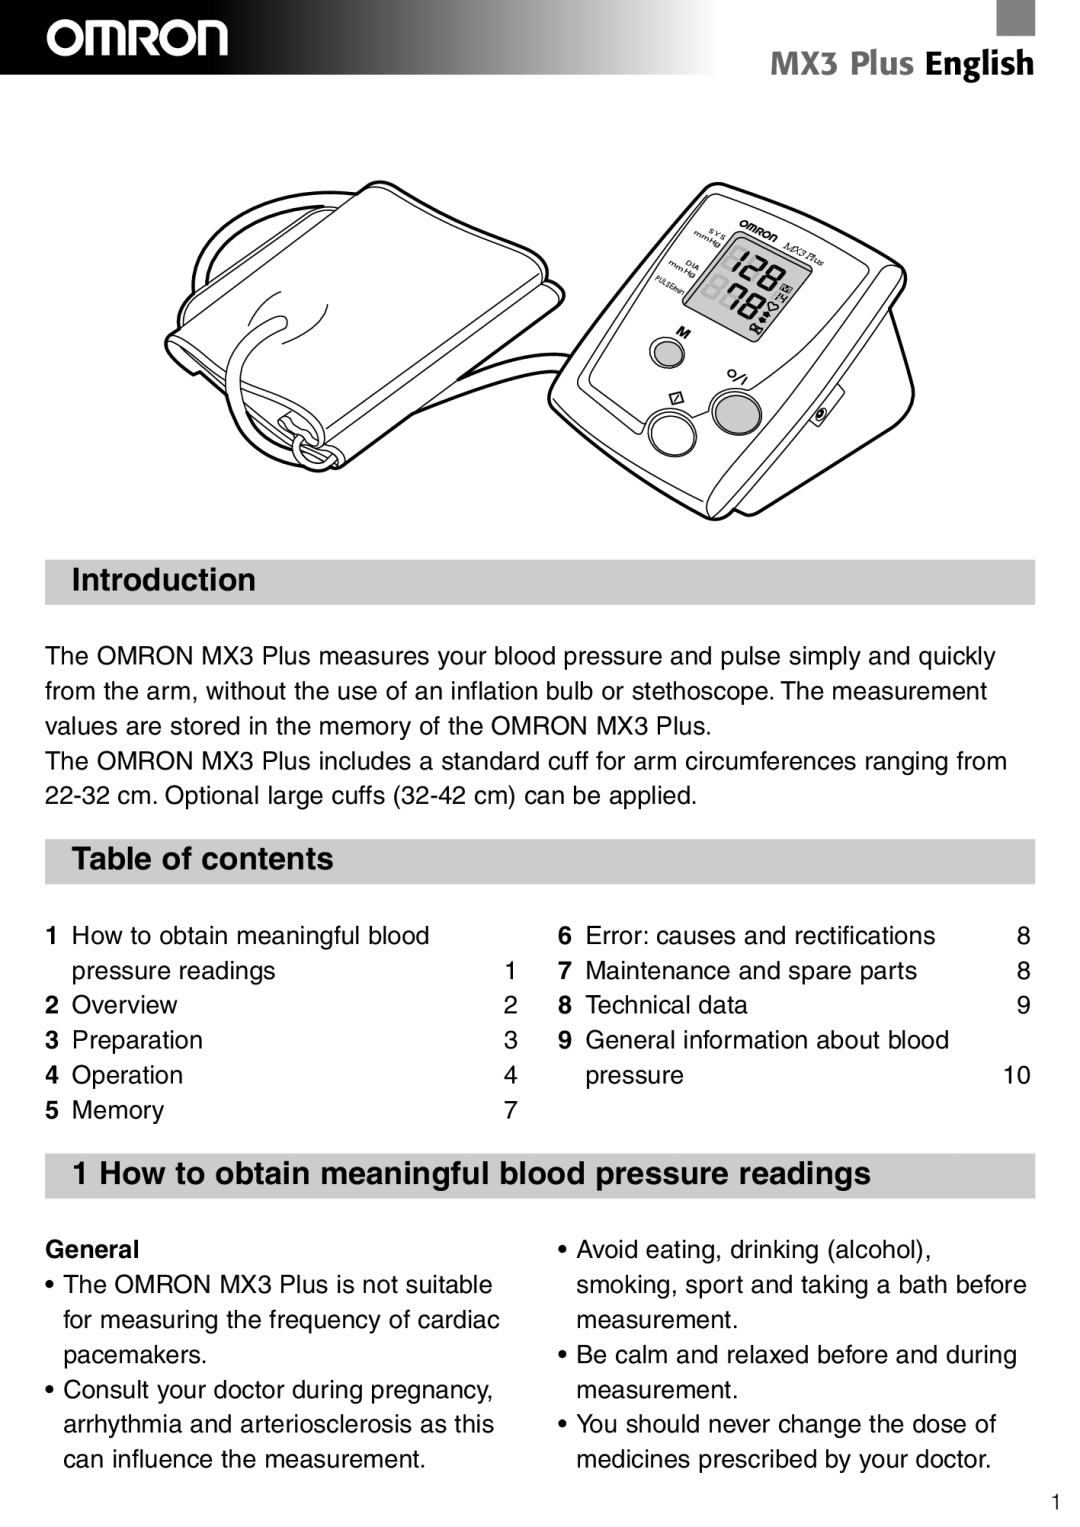 Omron Healthcare manual MX3 Plus English, Introduction, Table of contents, General 